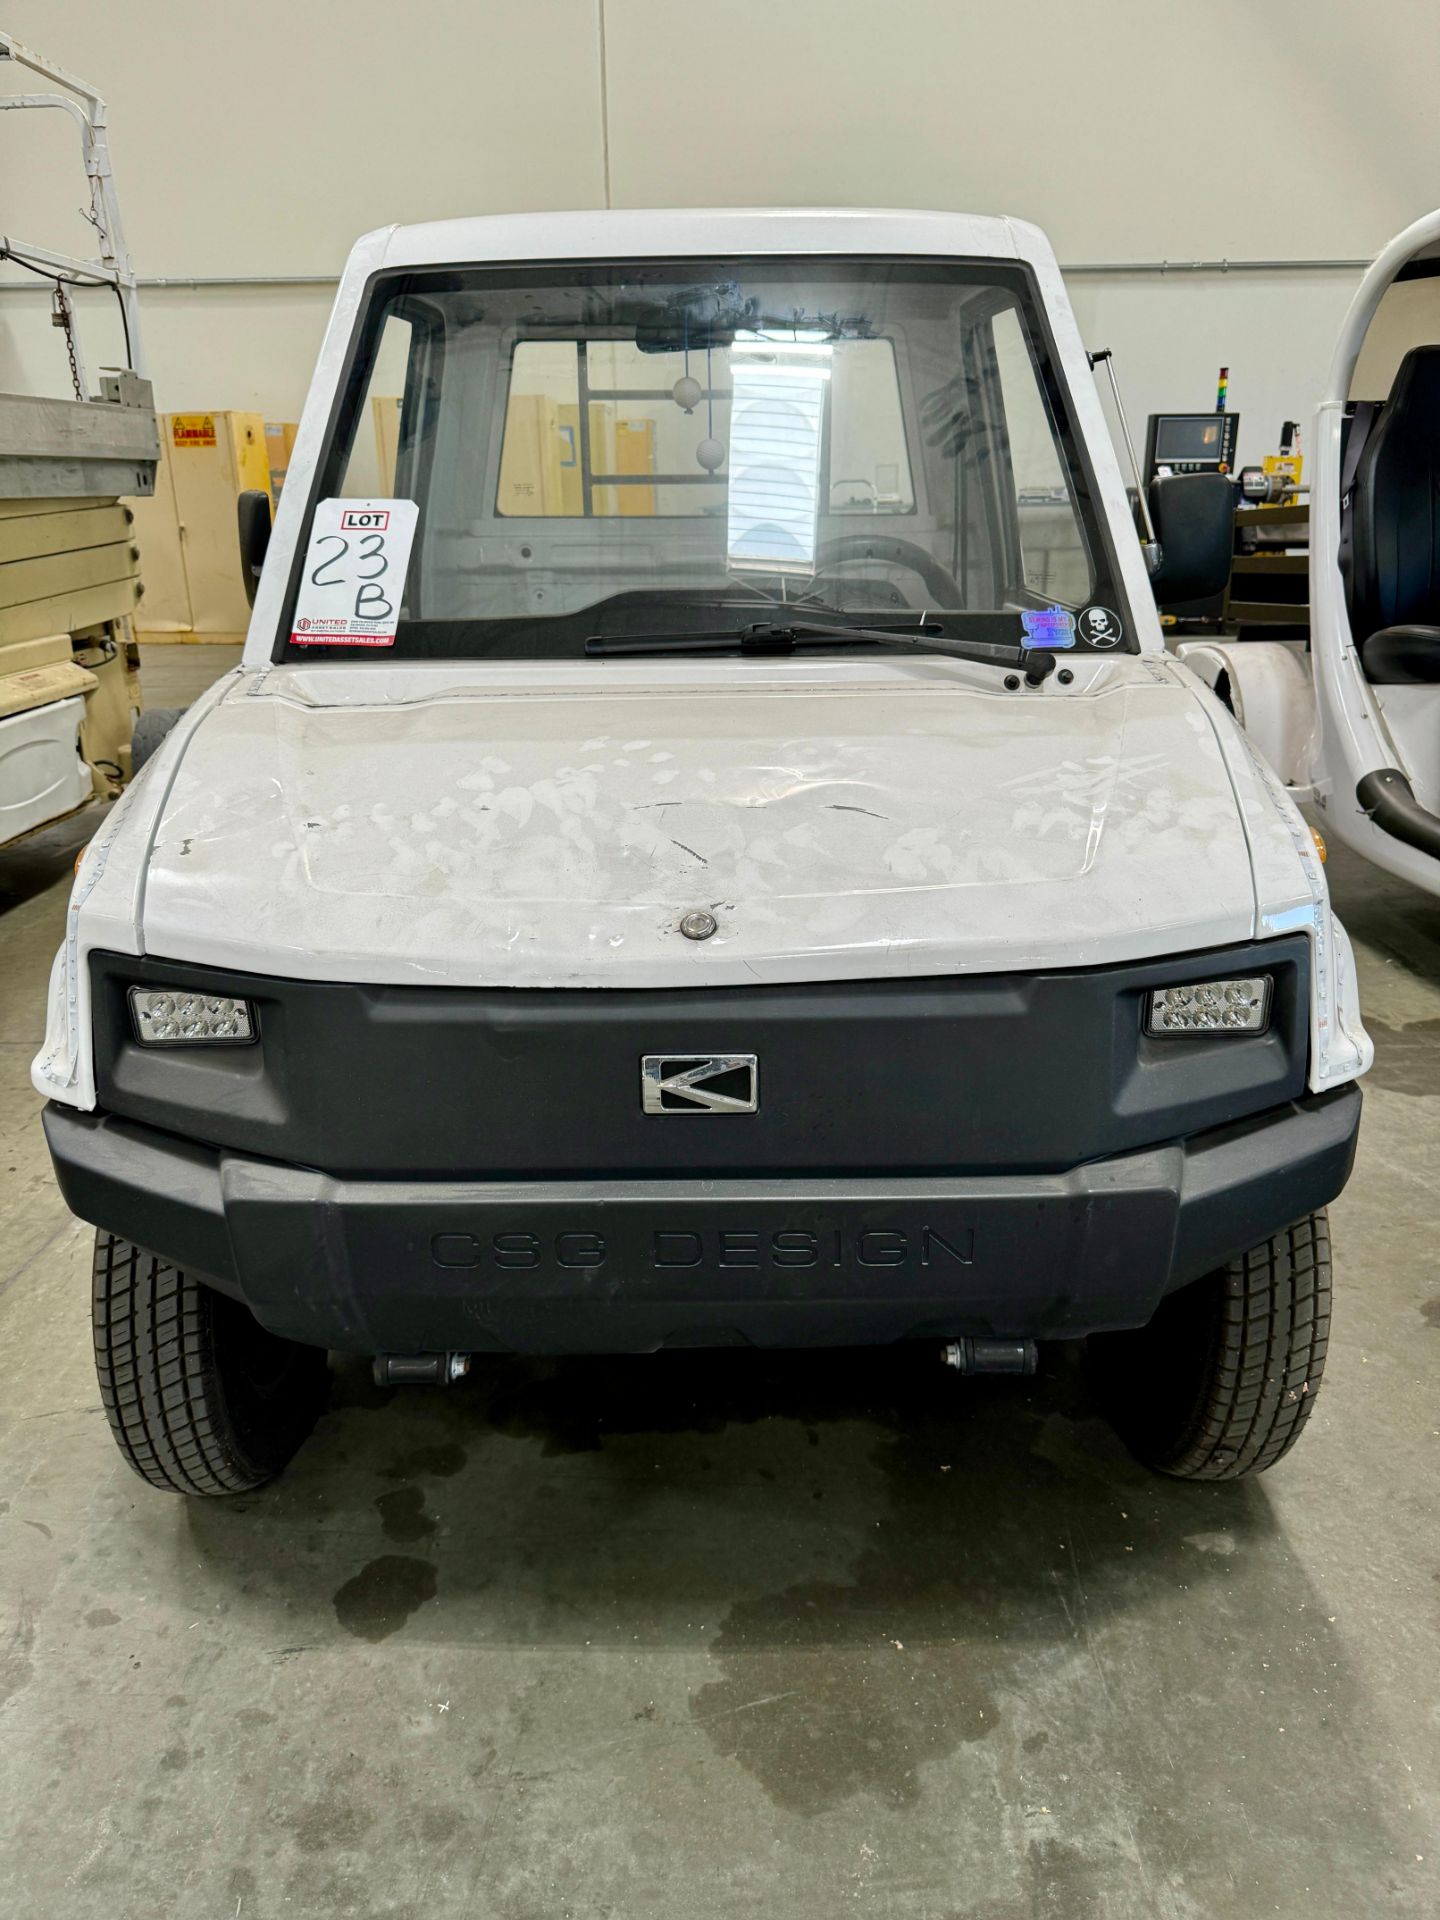 CSG DESIGN ELECTRIC UTILITY VEHICLE, OUT OF SERVICE/MAY NEED BATTERIES - Image 7 of 10